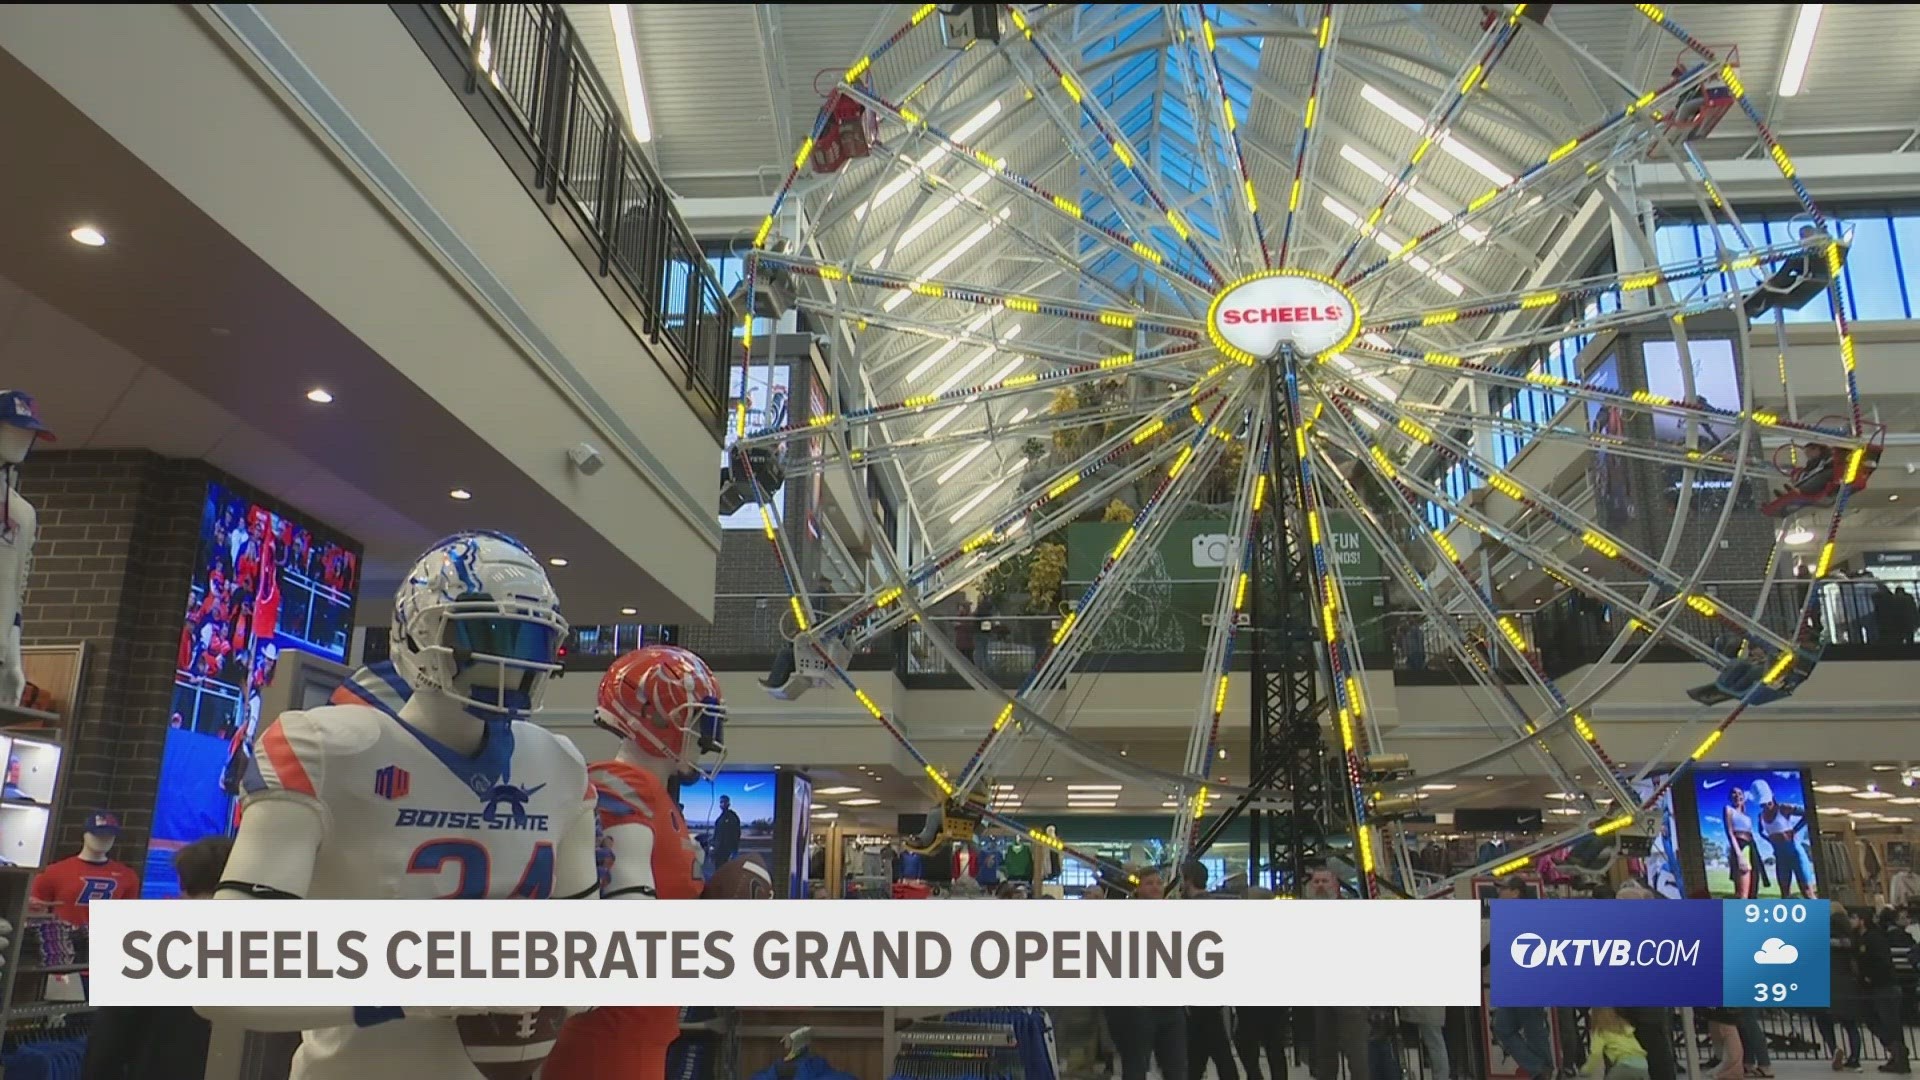 The sporting goods superstore is the largest retail store in the state of Idaho, complete with an aquarium, café and 65-foot ferris wheel